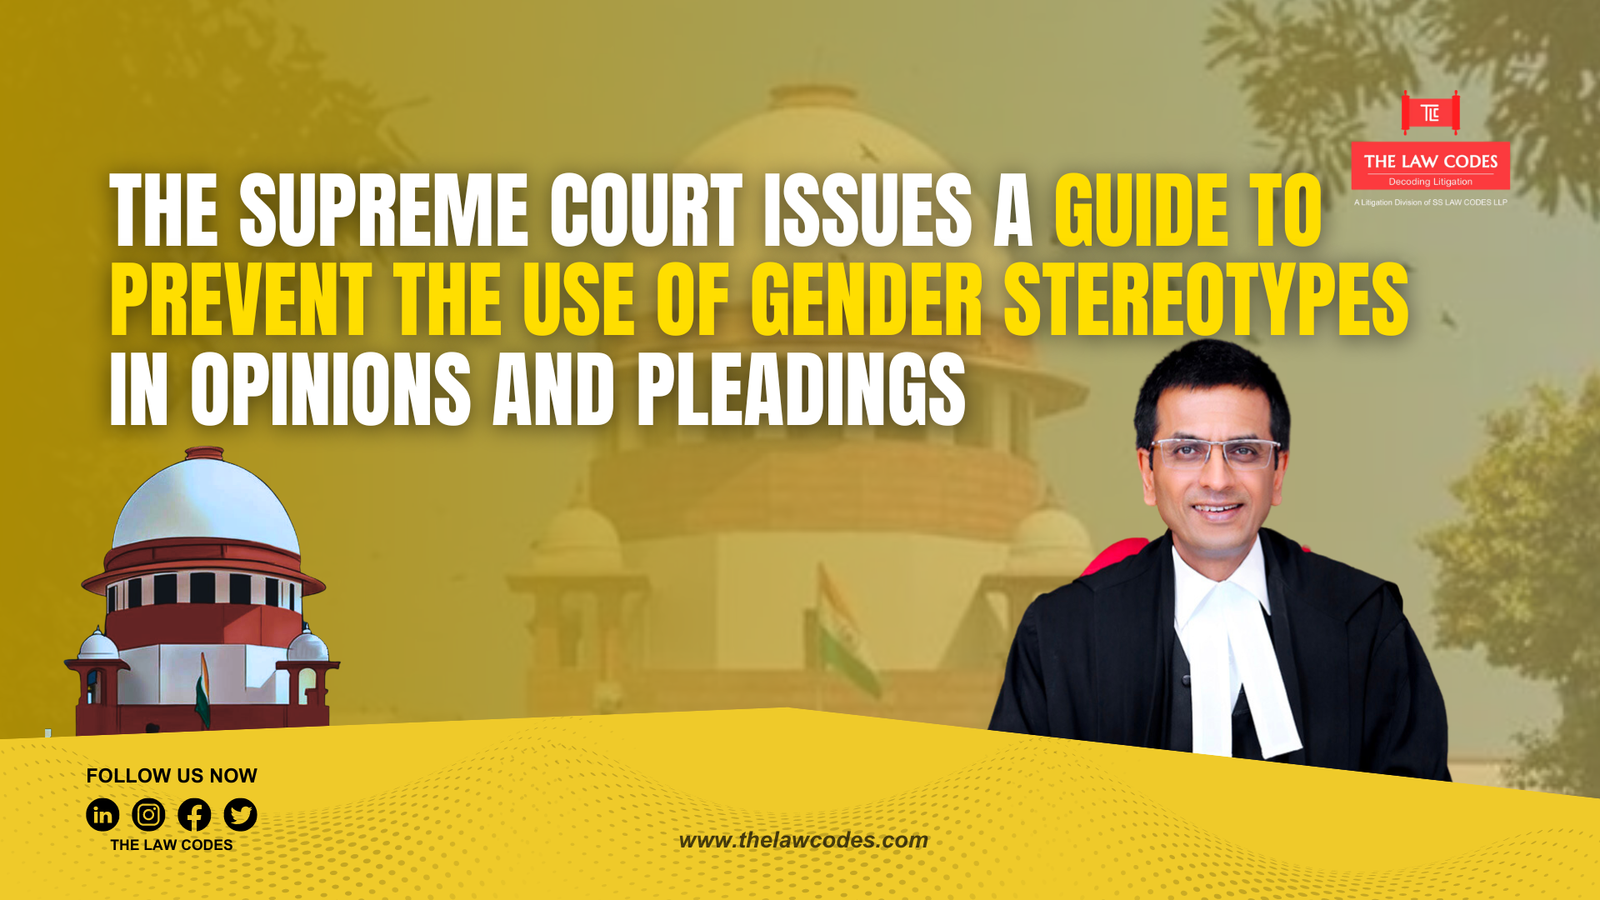 The Supreme Court Issues A Guide To Prevent The Use Of Gender Stereotypes In Opinions And Pleadings